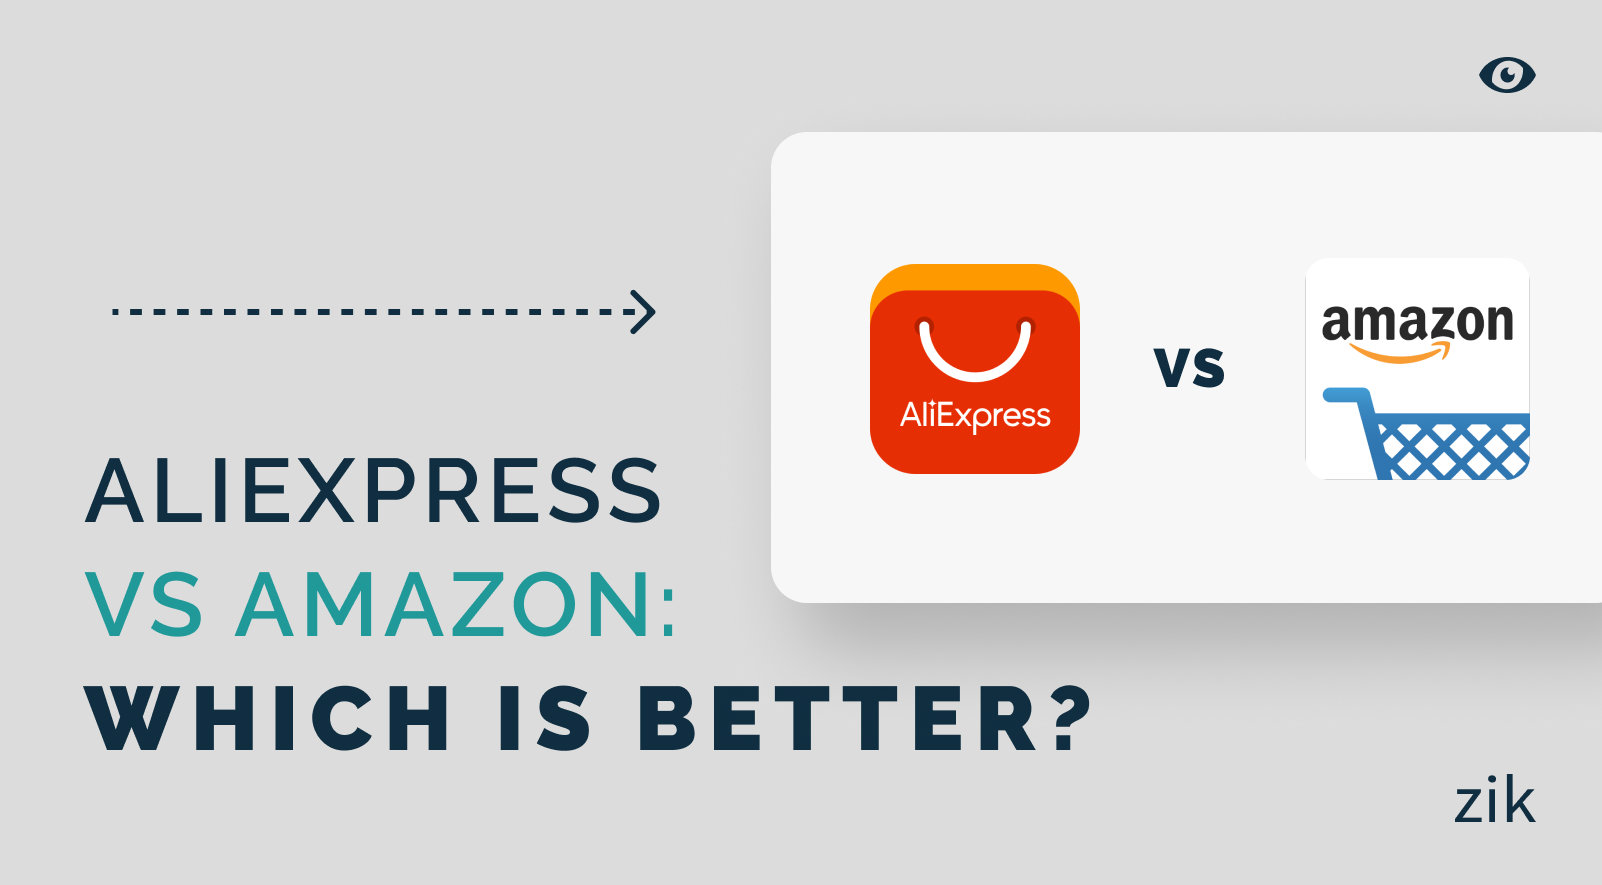 AliExpress Review - The Good and The Bad for 2023